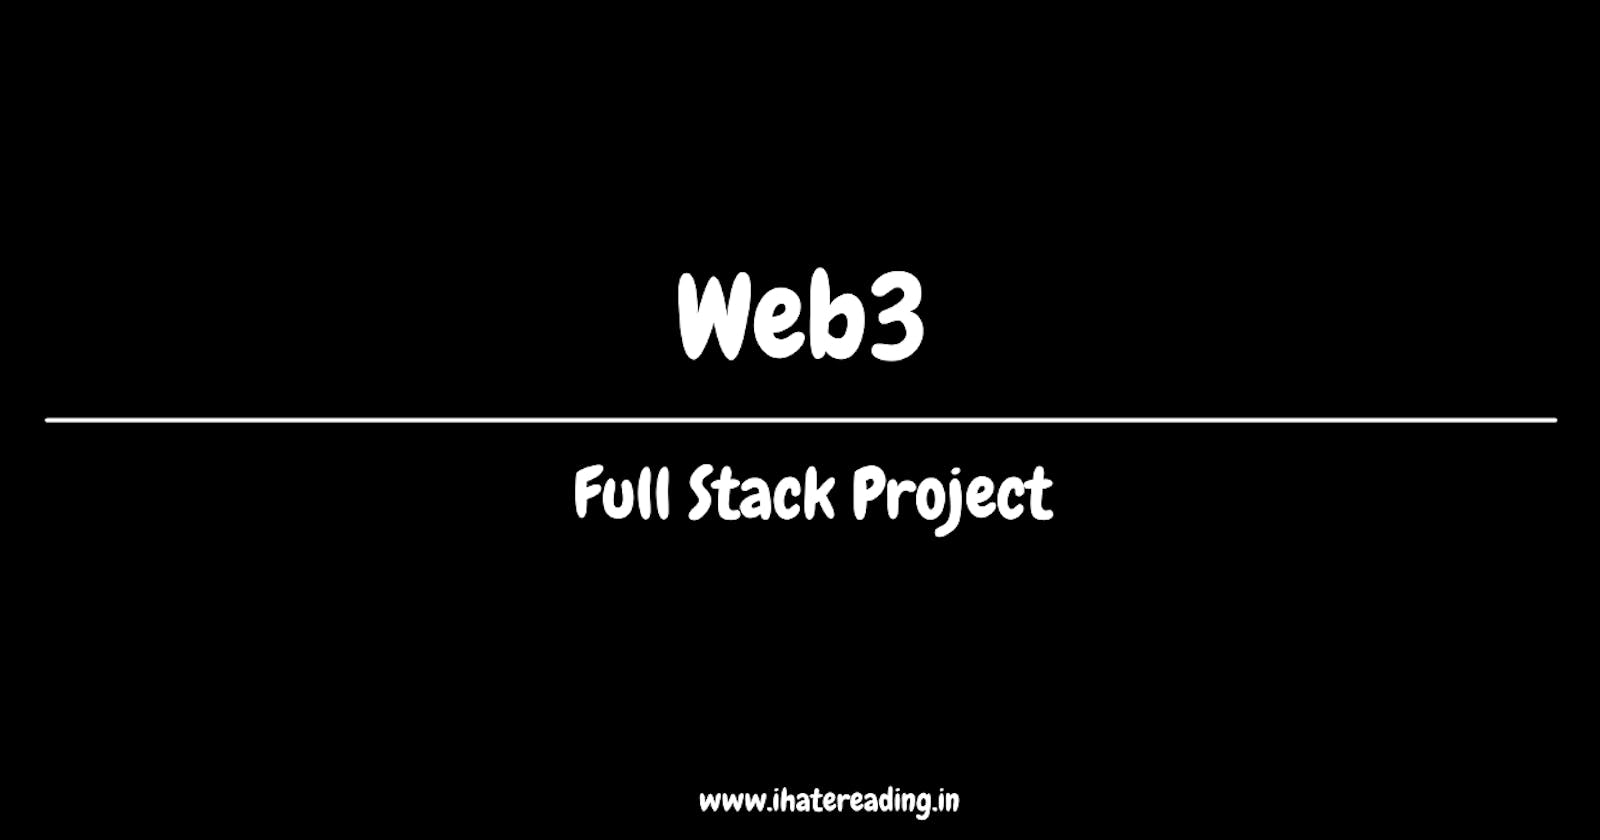 Full Stack Web3 Project